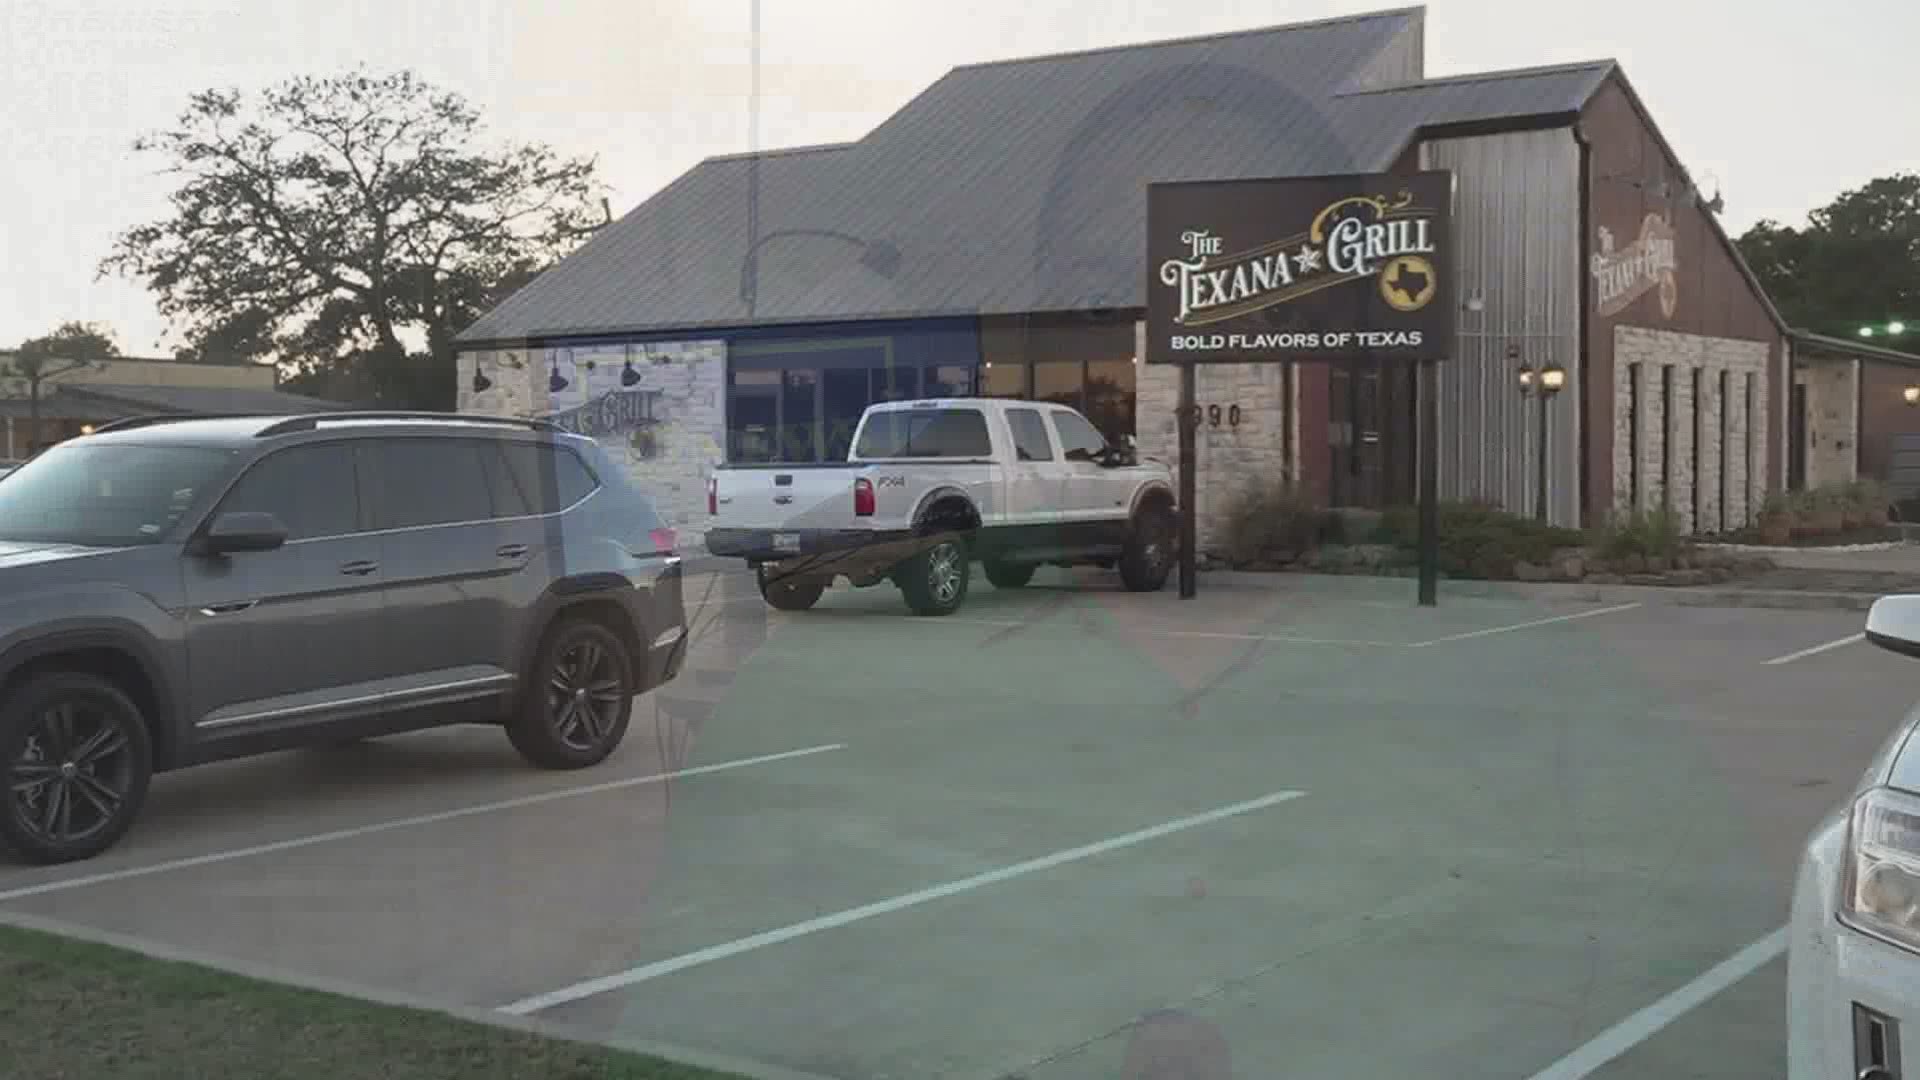 John Swift owns Texana Grill in Beaumont, and says his staff will keep working to give customers the best experience possible even with restrictions in place